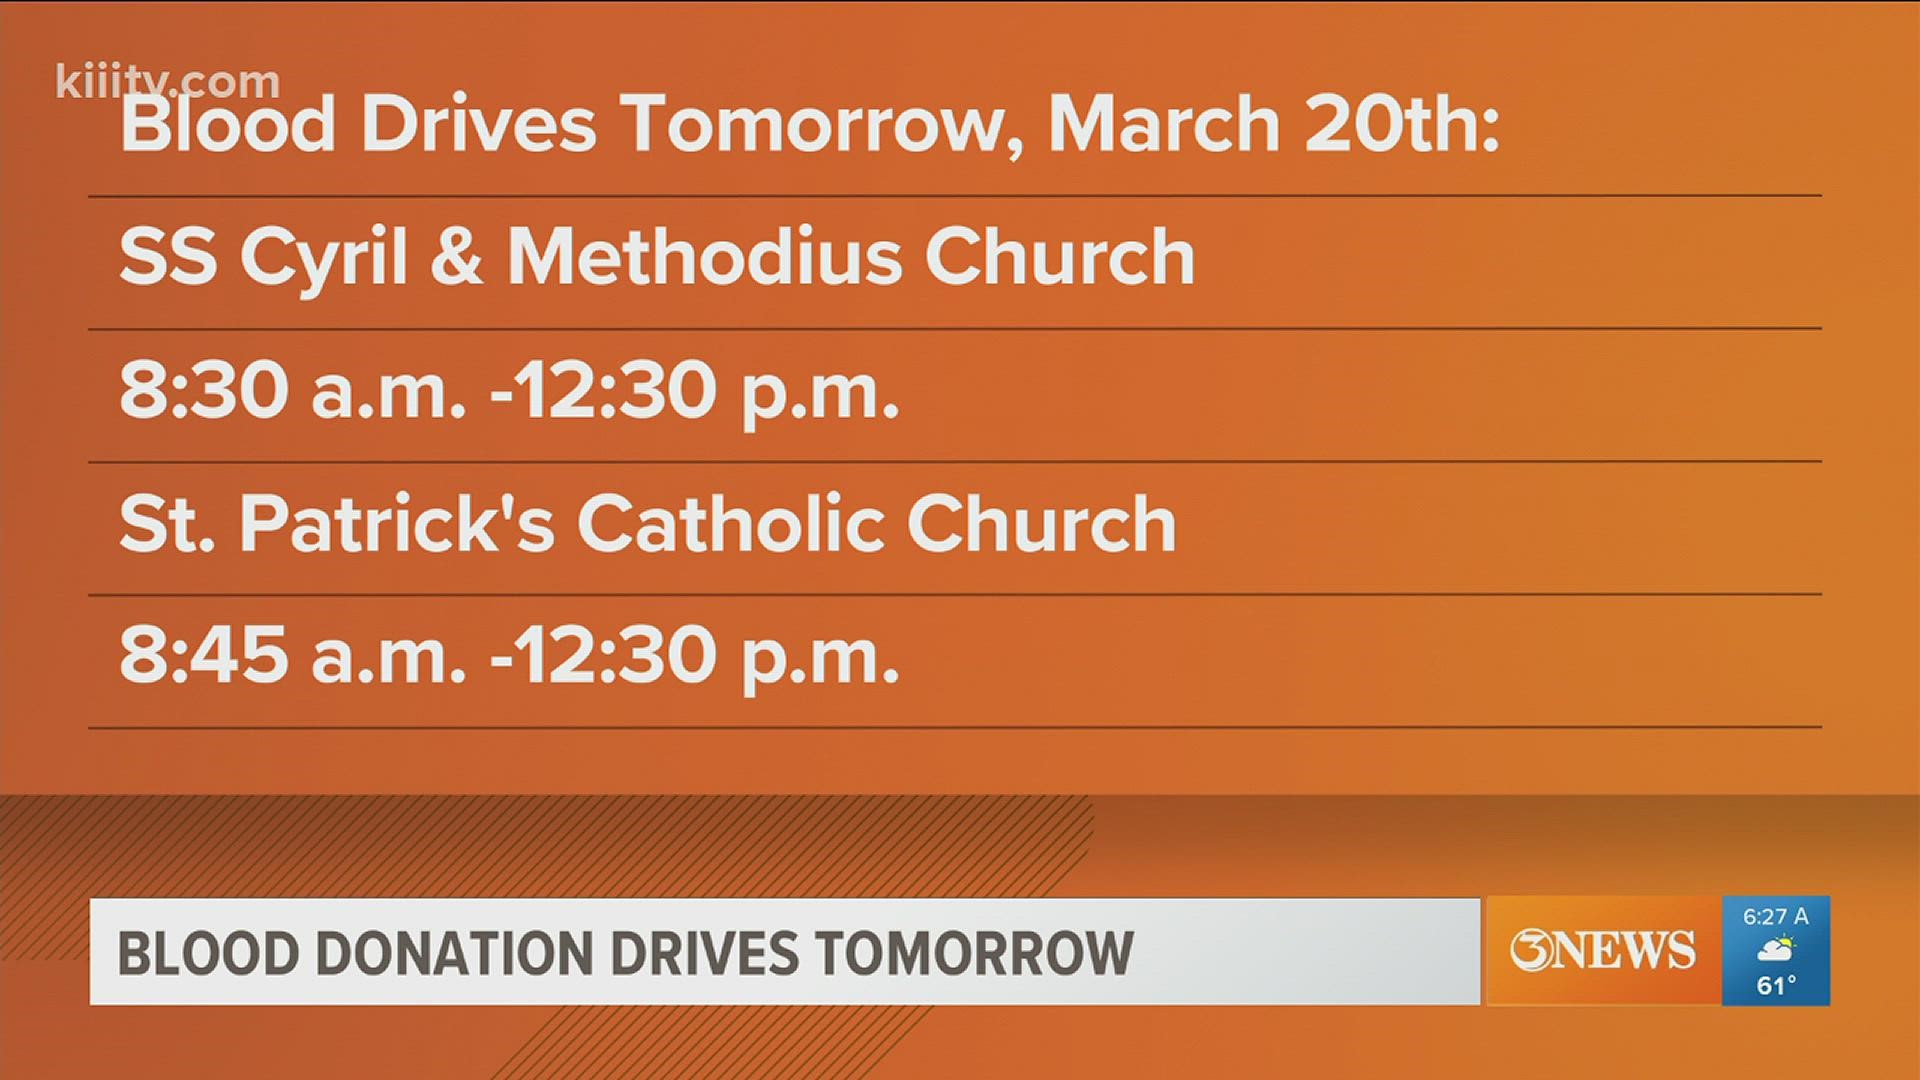 Multiple blood drives are coming to the area this Sunday in response to an increased need for blood following Spring Break.